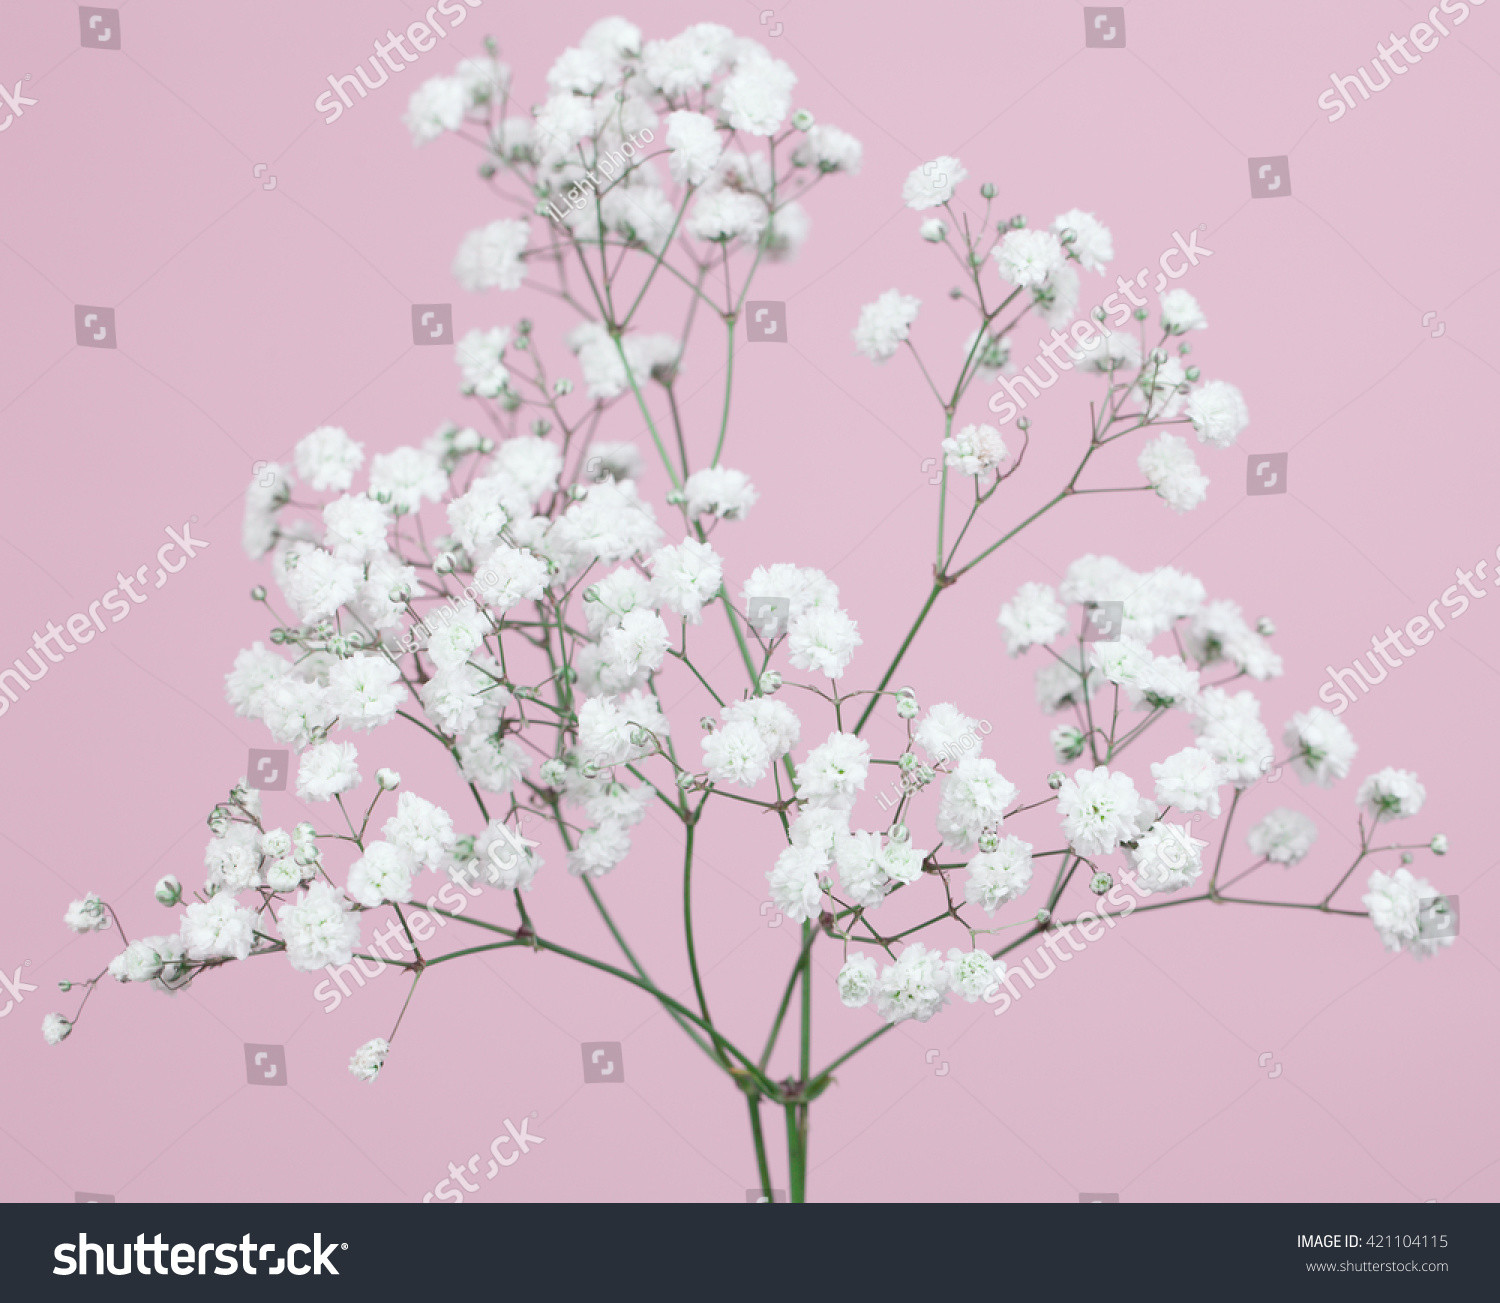 21 Stylish Light Up Branches for Vase 2024 free download light up branches for vase of bunch od babys breath flowers on a light pink background ez canvas within id 421104115